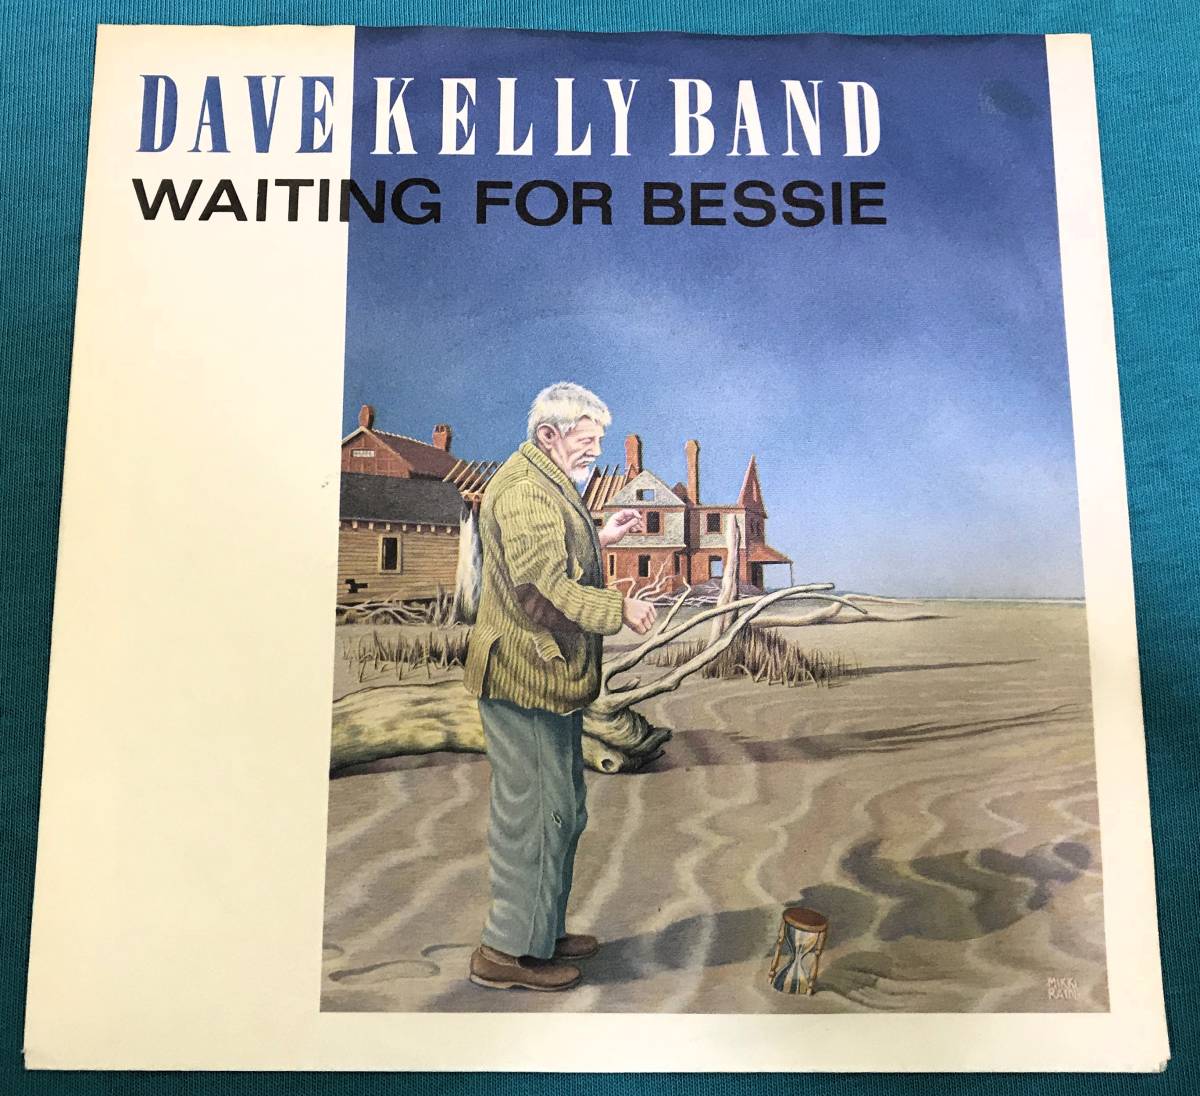 7”●The Dave Kelly Band / Waiting For Bessie GERオリジナル盤 Metronome 821 456-7 パブロック PUB ROCK_画像1